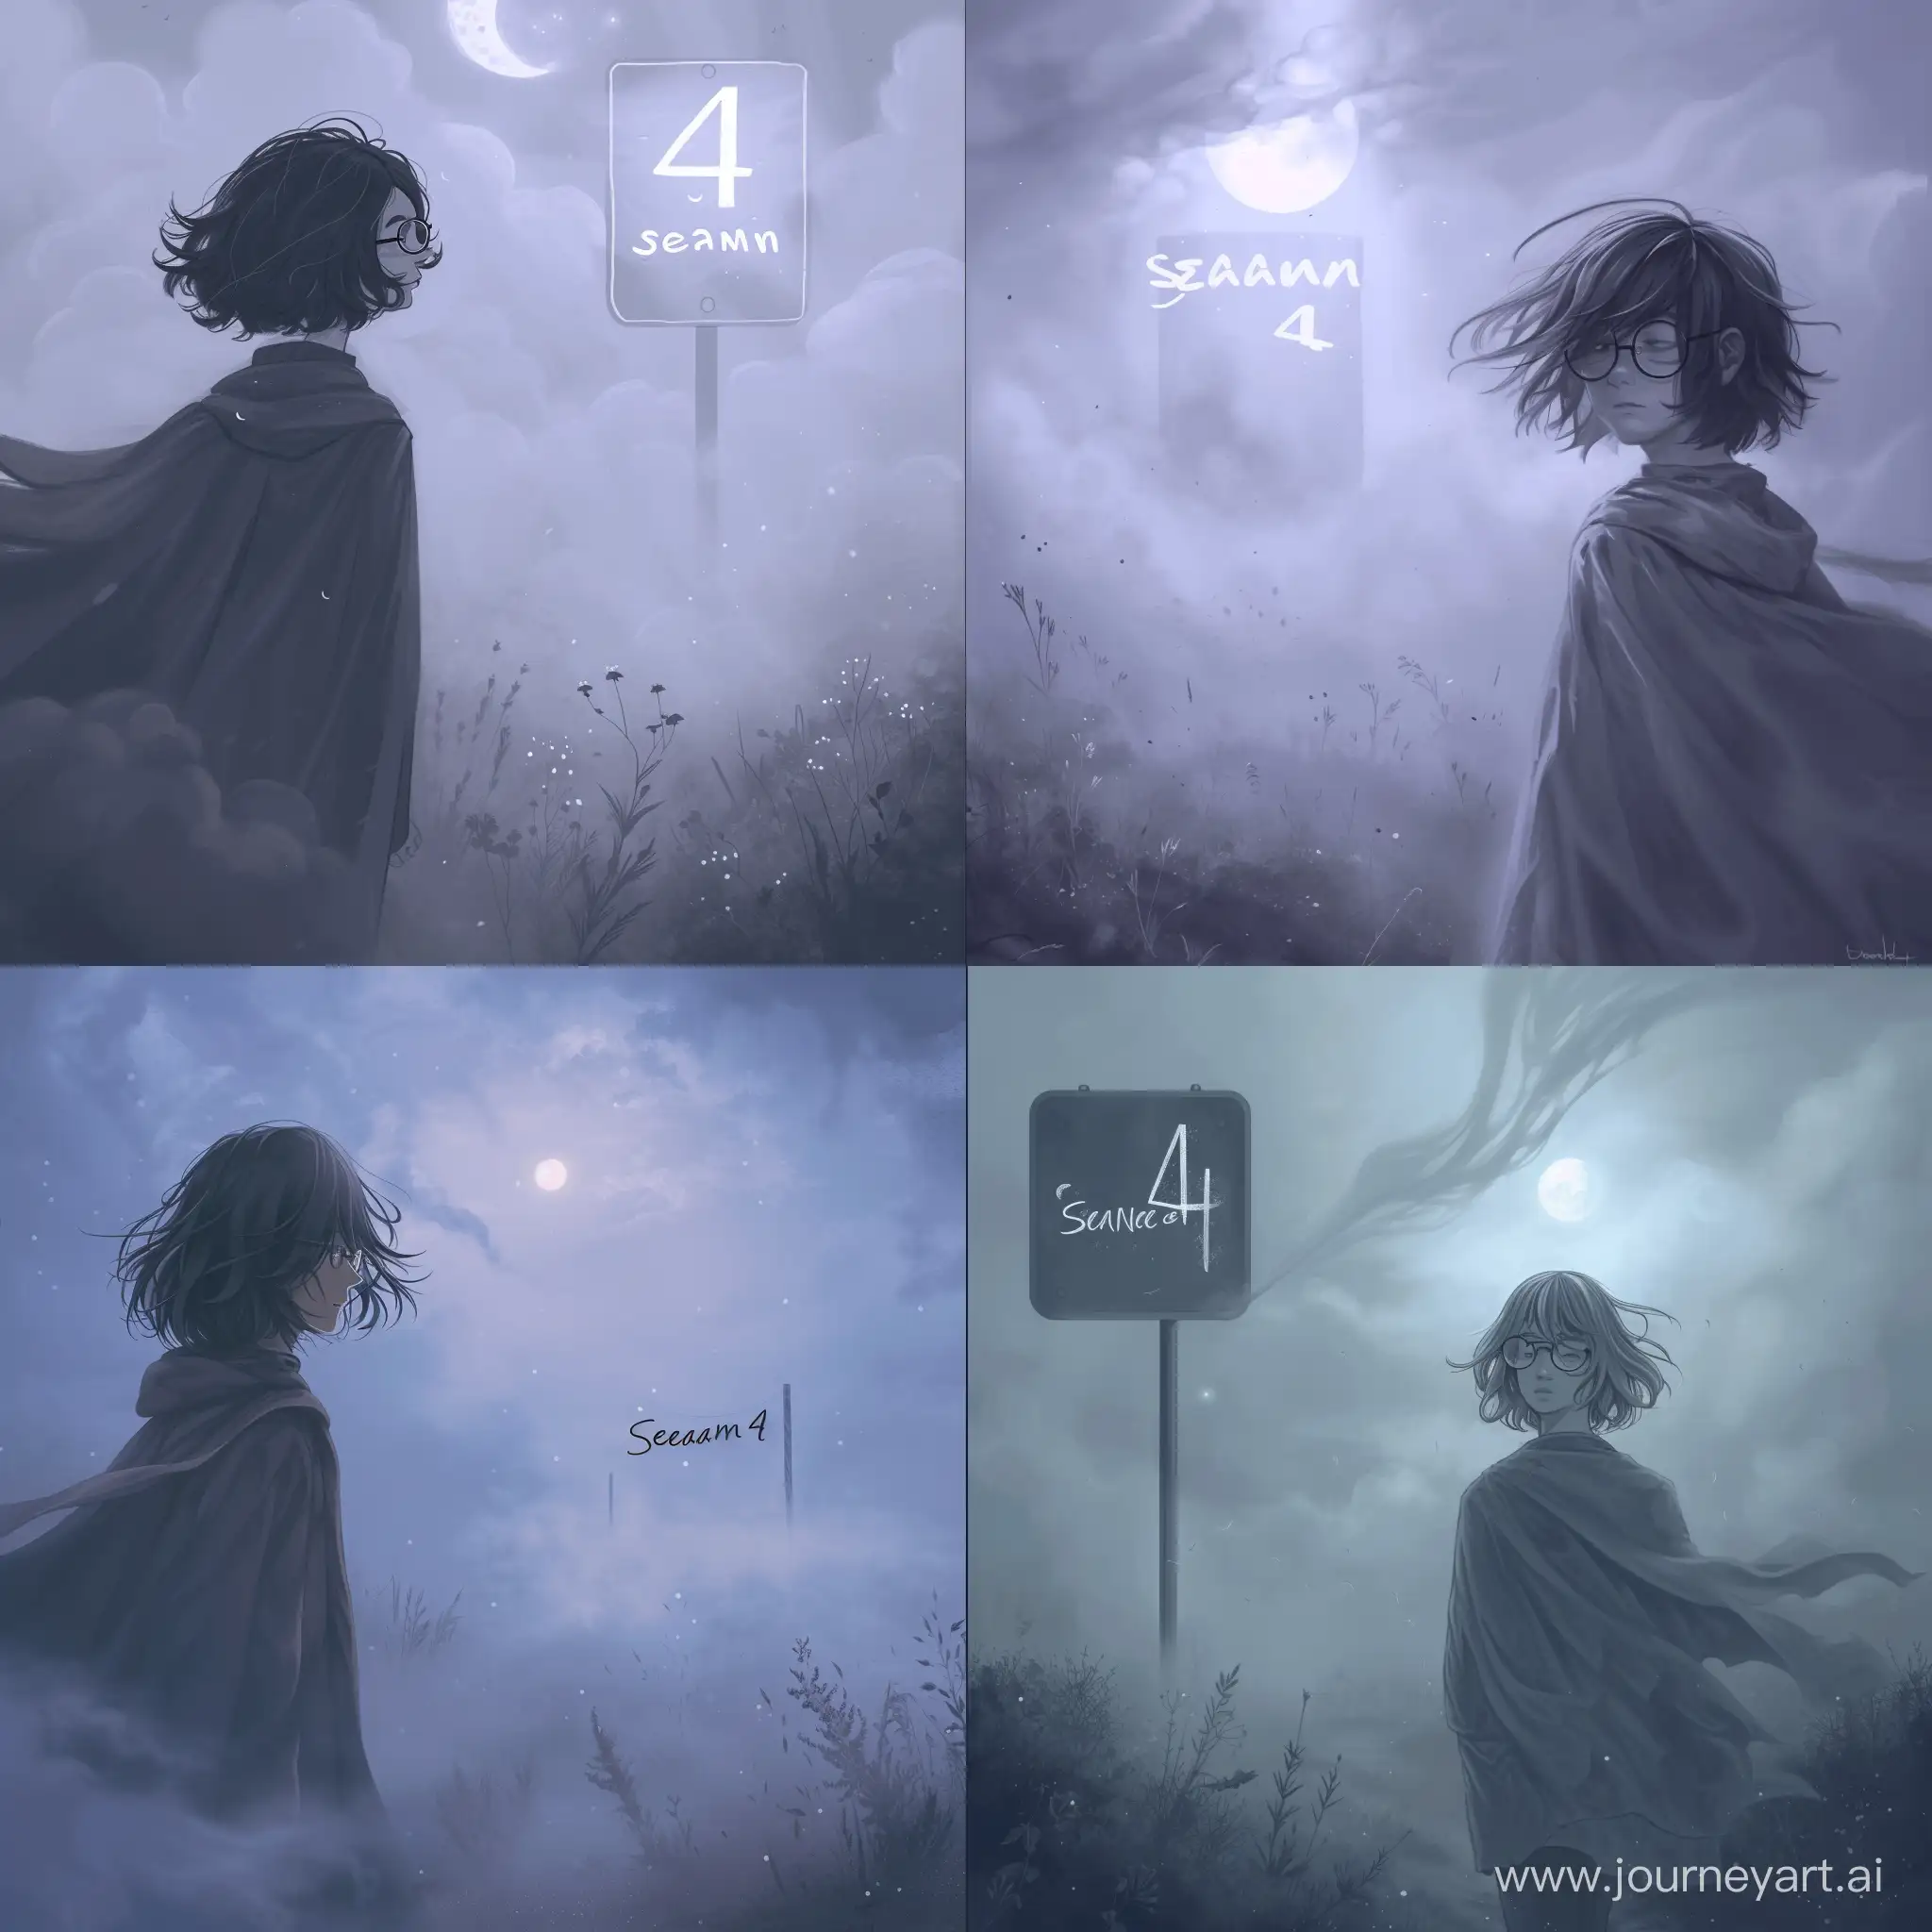 A 17-year-old guy with shoulder-length hair and glasses walks through a foggy field at dusk. The fog floats low, creating a mysterious atmosphere. He is wearing a long cloak that flutters in the wind and his hair flutters softly. The light of the moon penetrates the clouds, creating a play of light and shadow. The sign "Season 4" slowly appears from the fog, adding to the mystery of the scene. The image should be rendered using a soft and mysterious palette